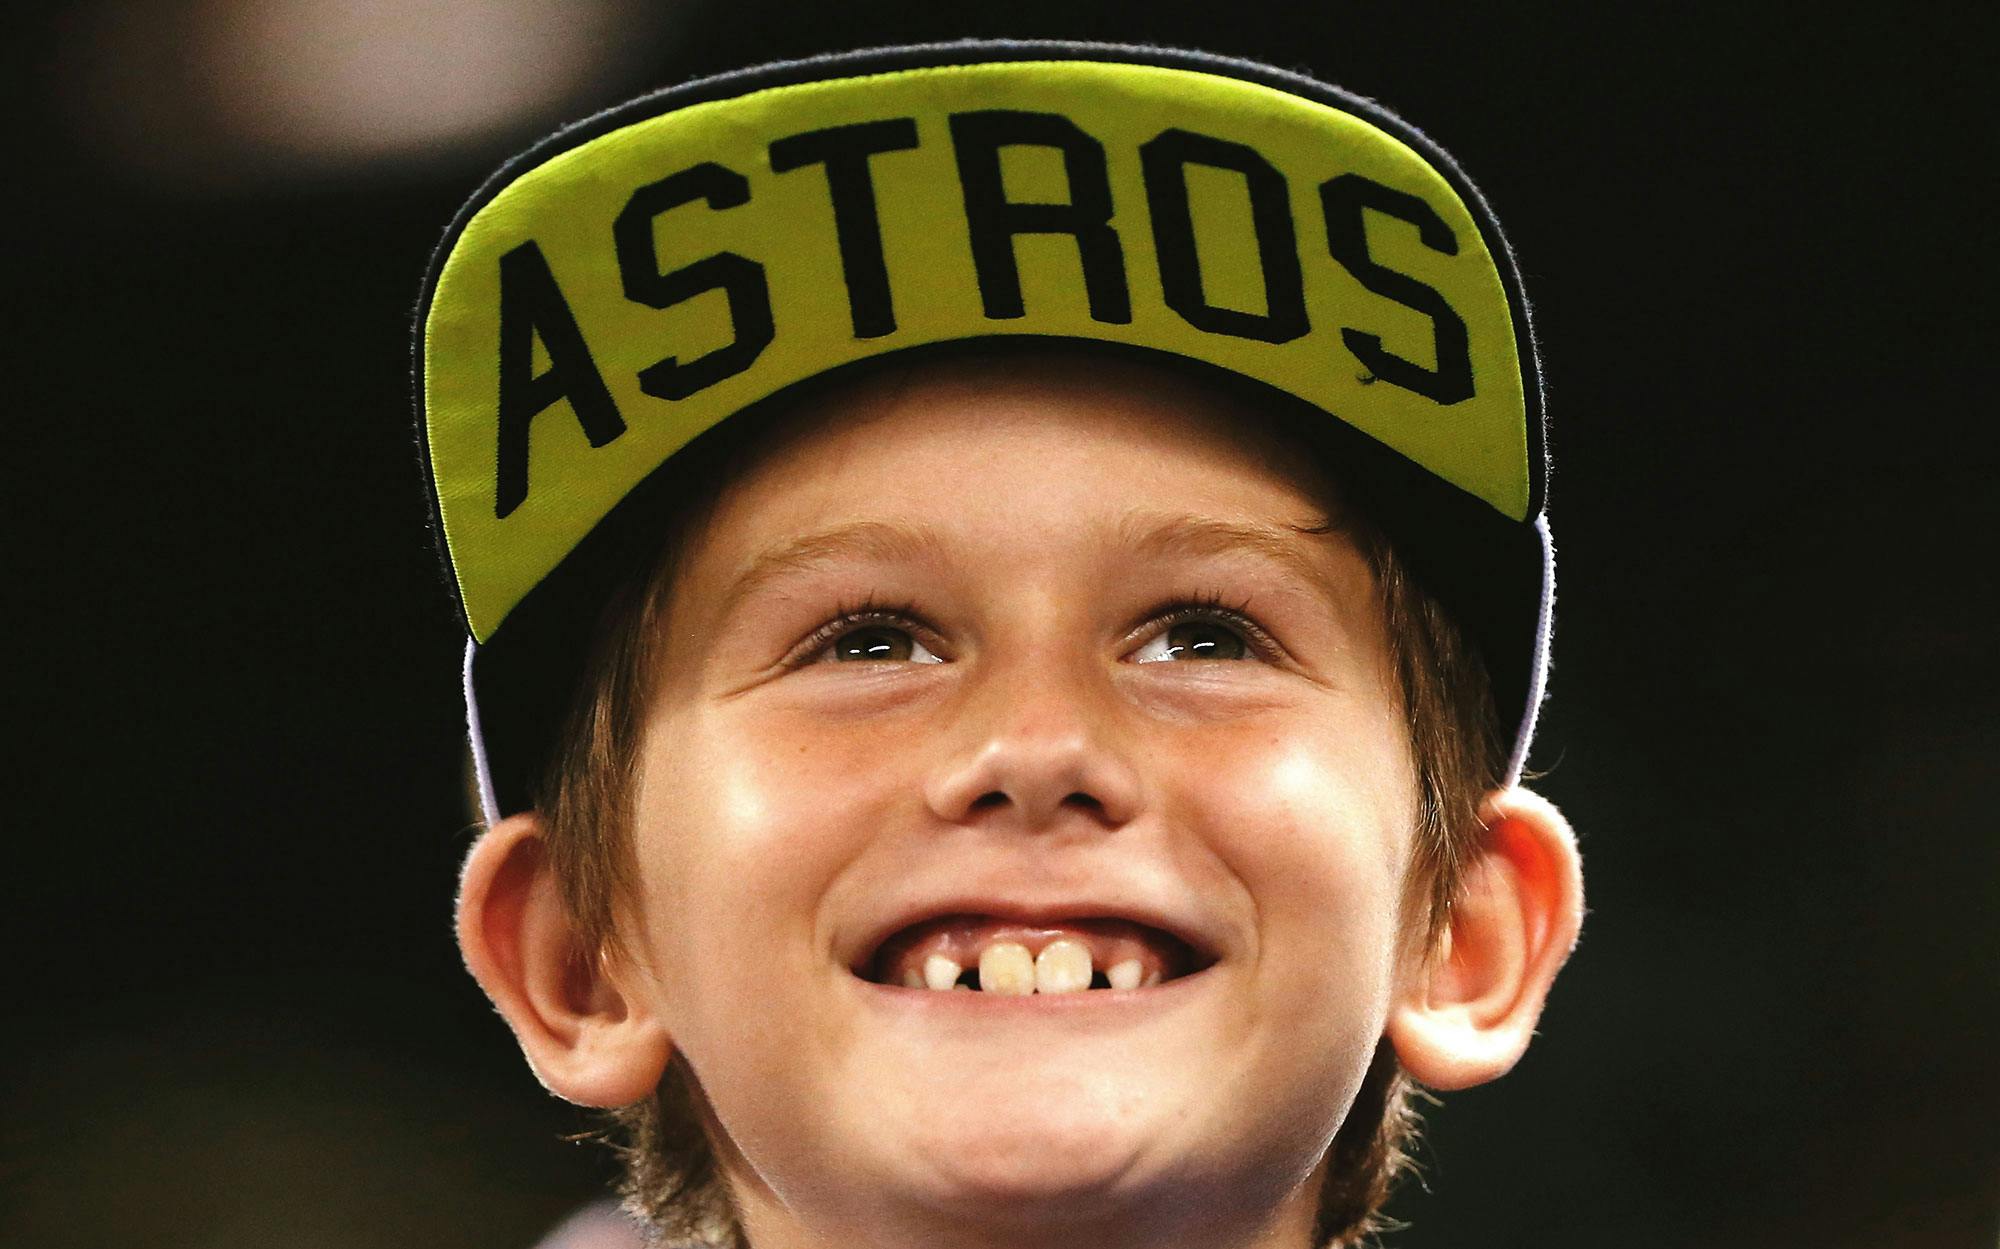 Once mocked, bright Astros jerseys have developed into fan